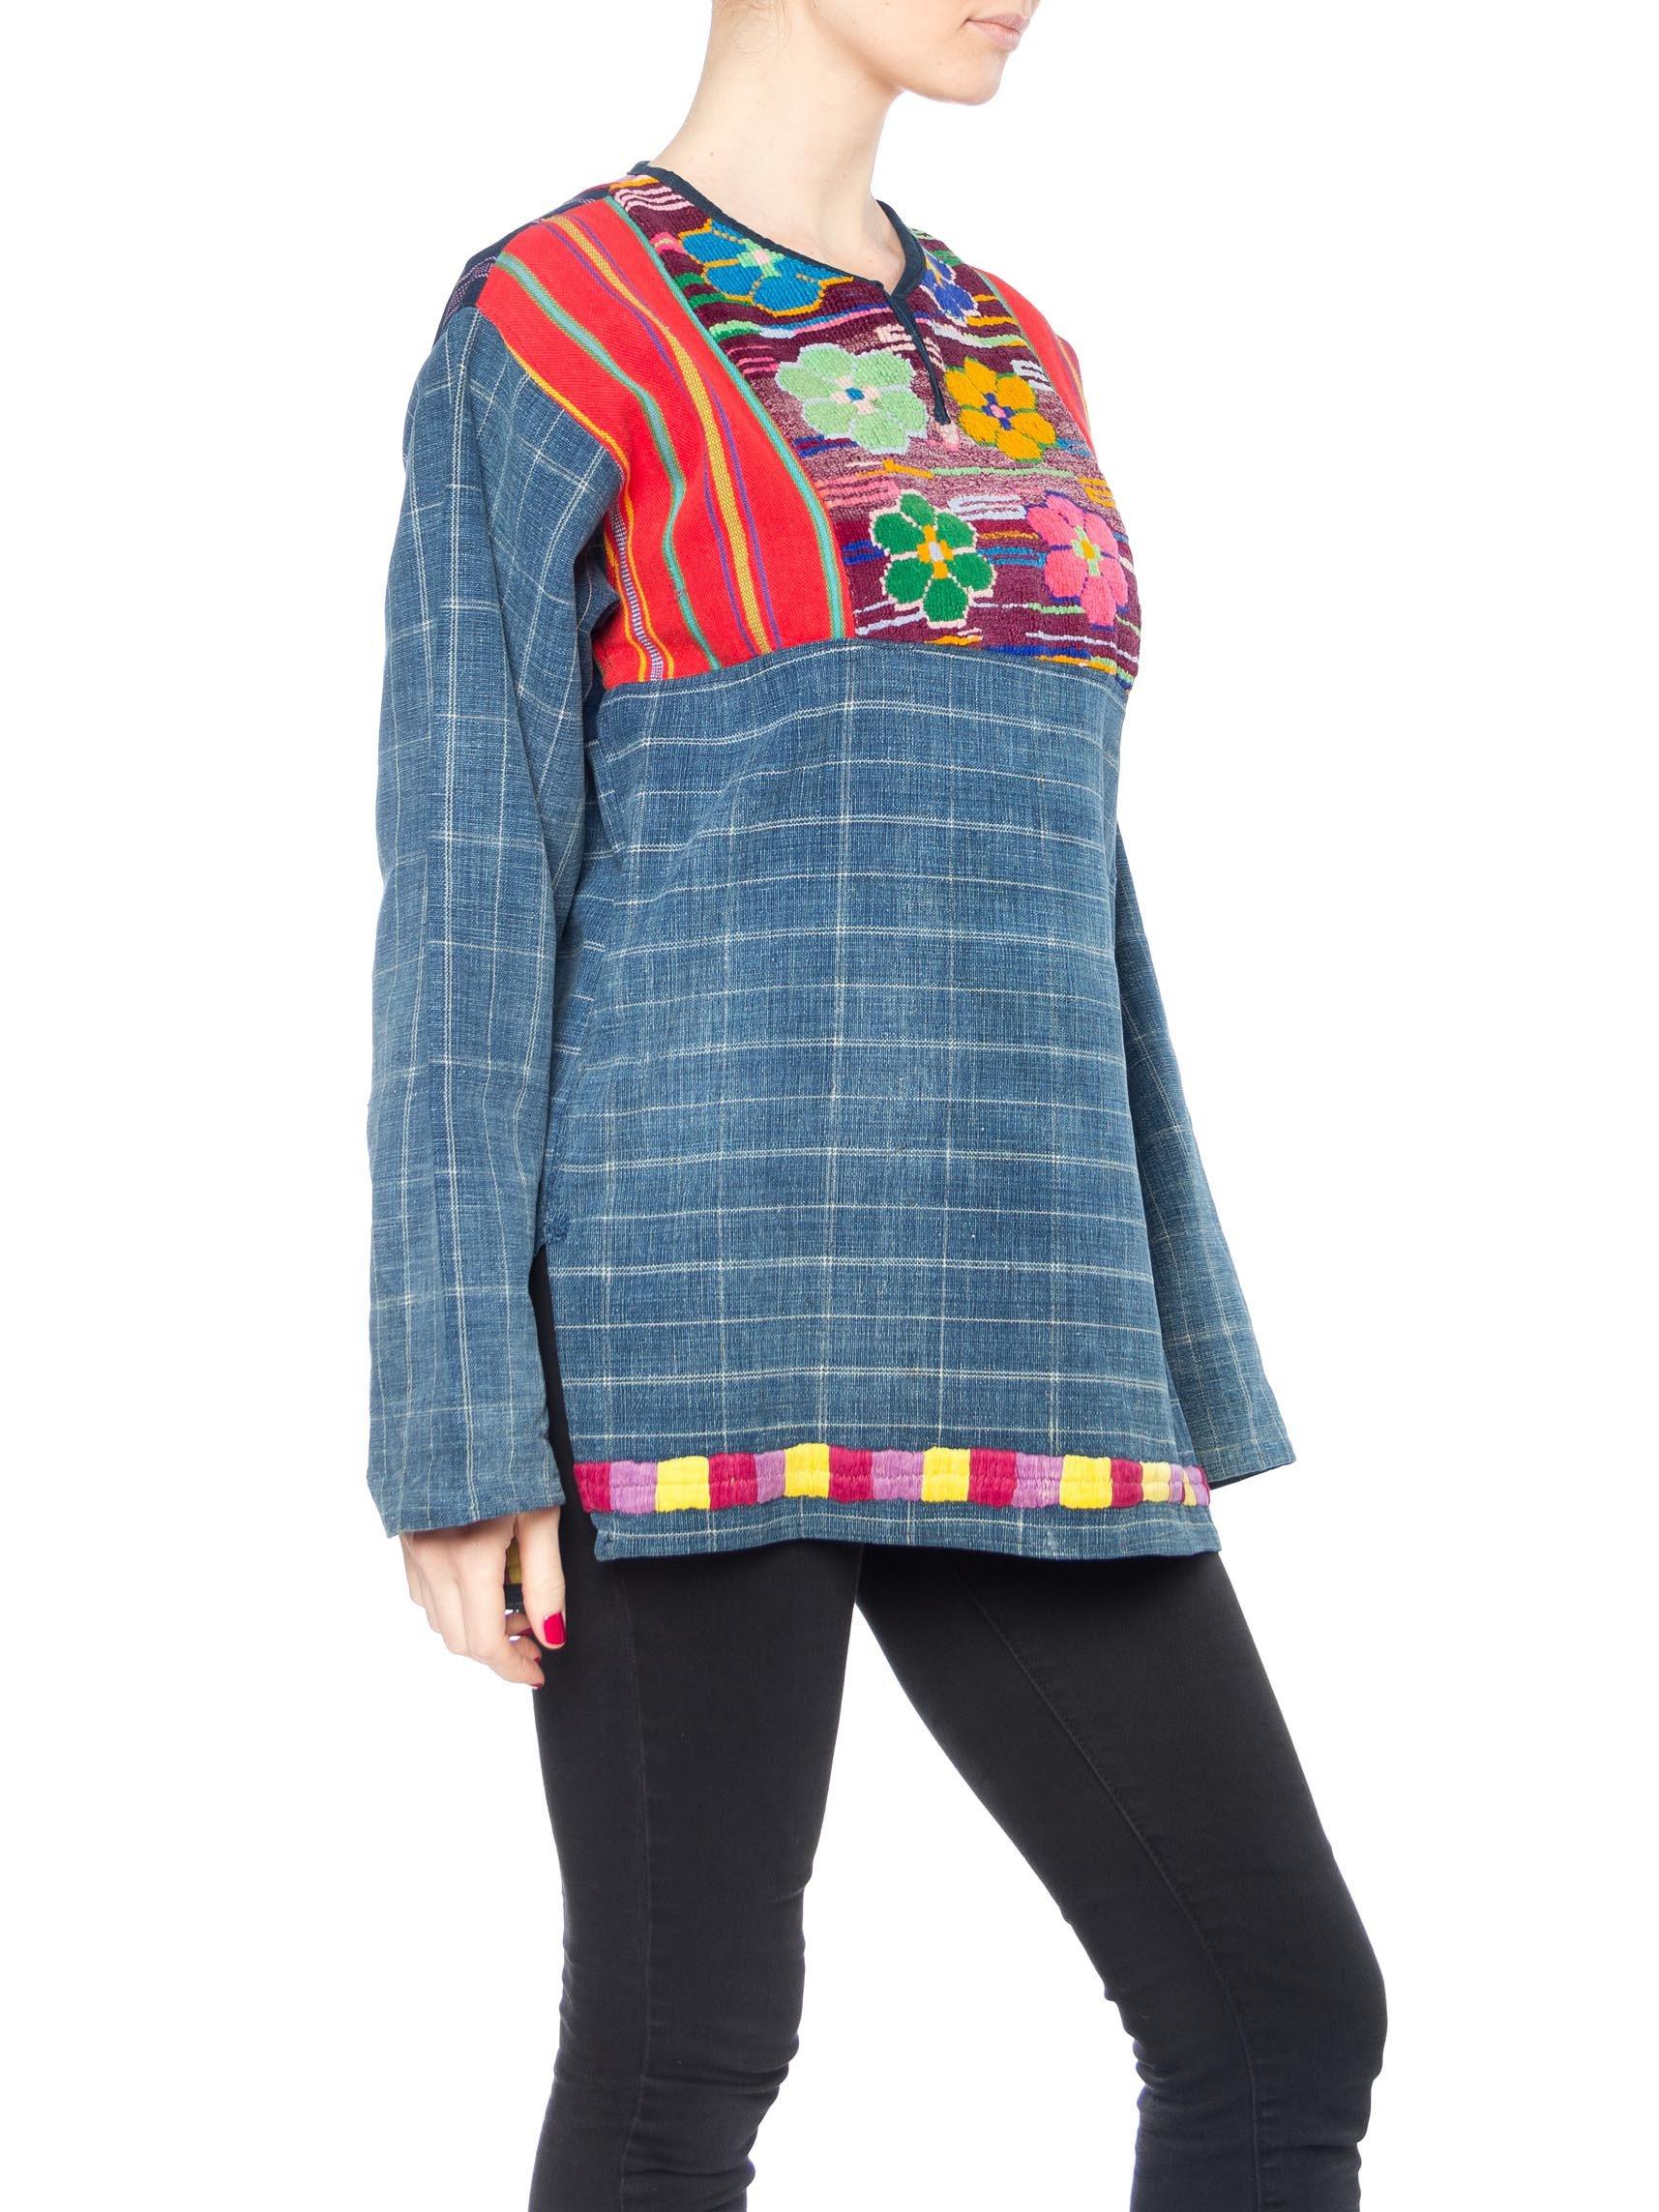 1970S Indigo Blue Cotton South American Pullover Top With Colorful Handwoven & Embroidered Details